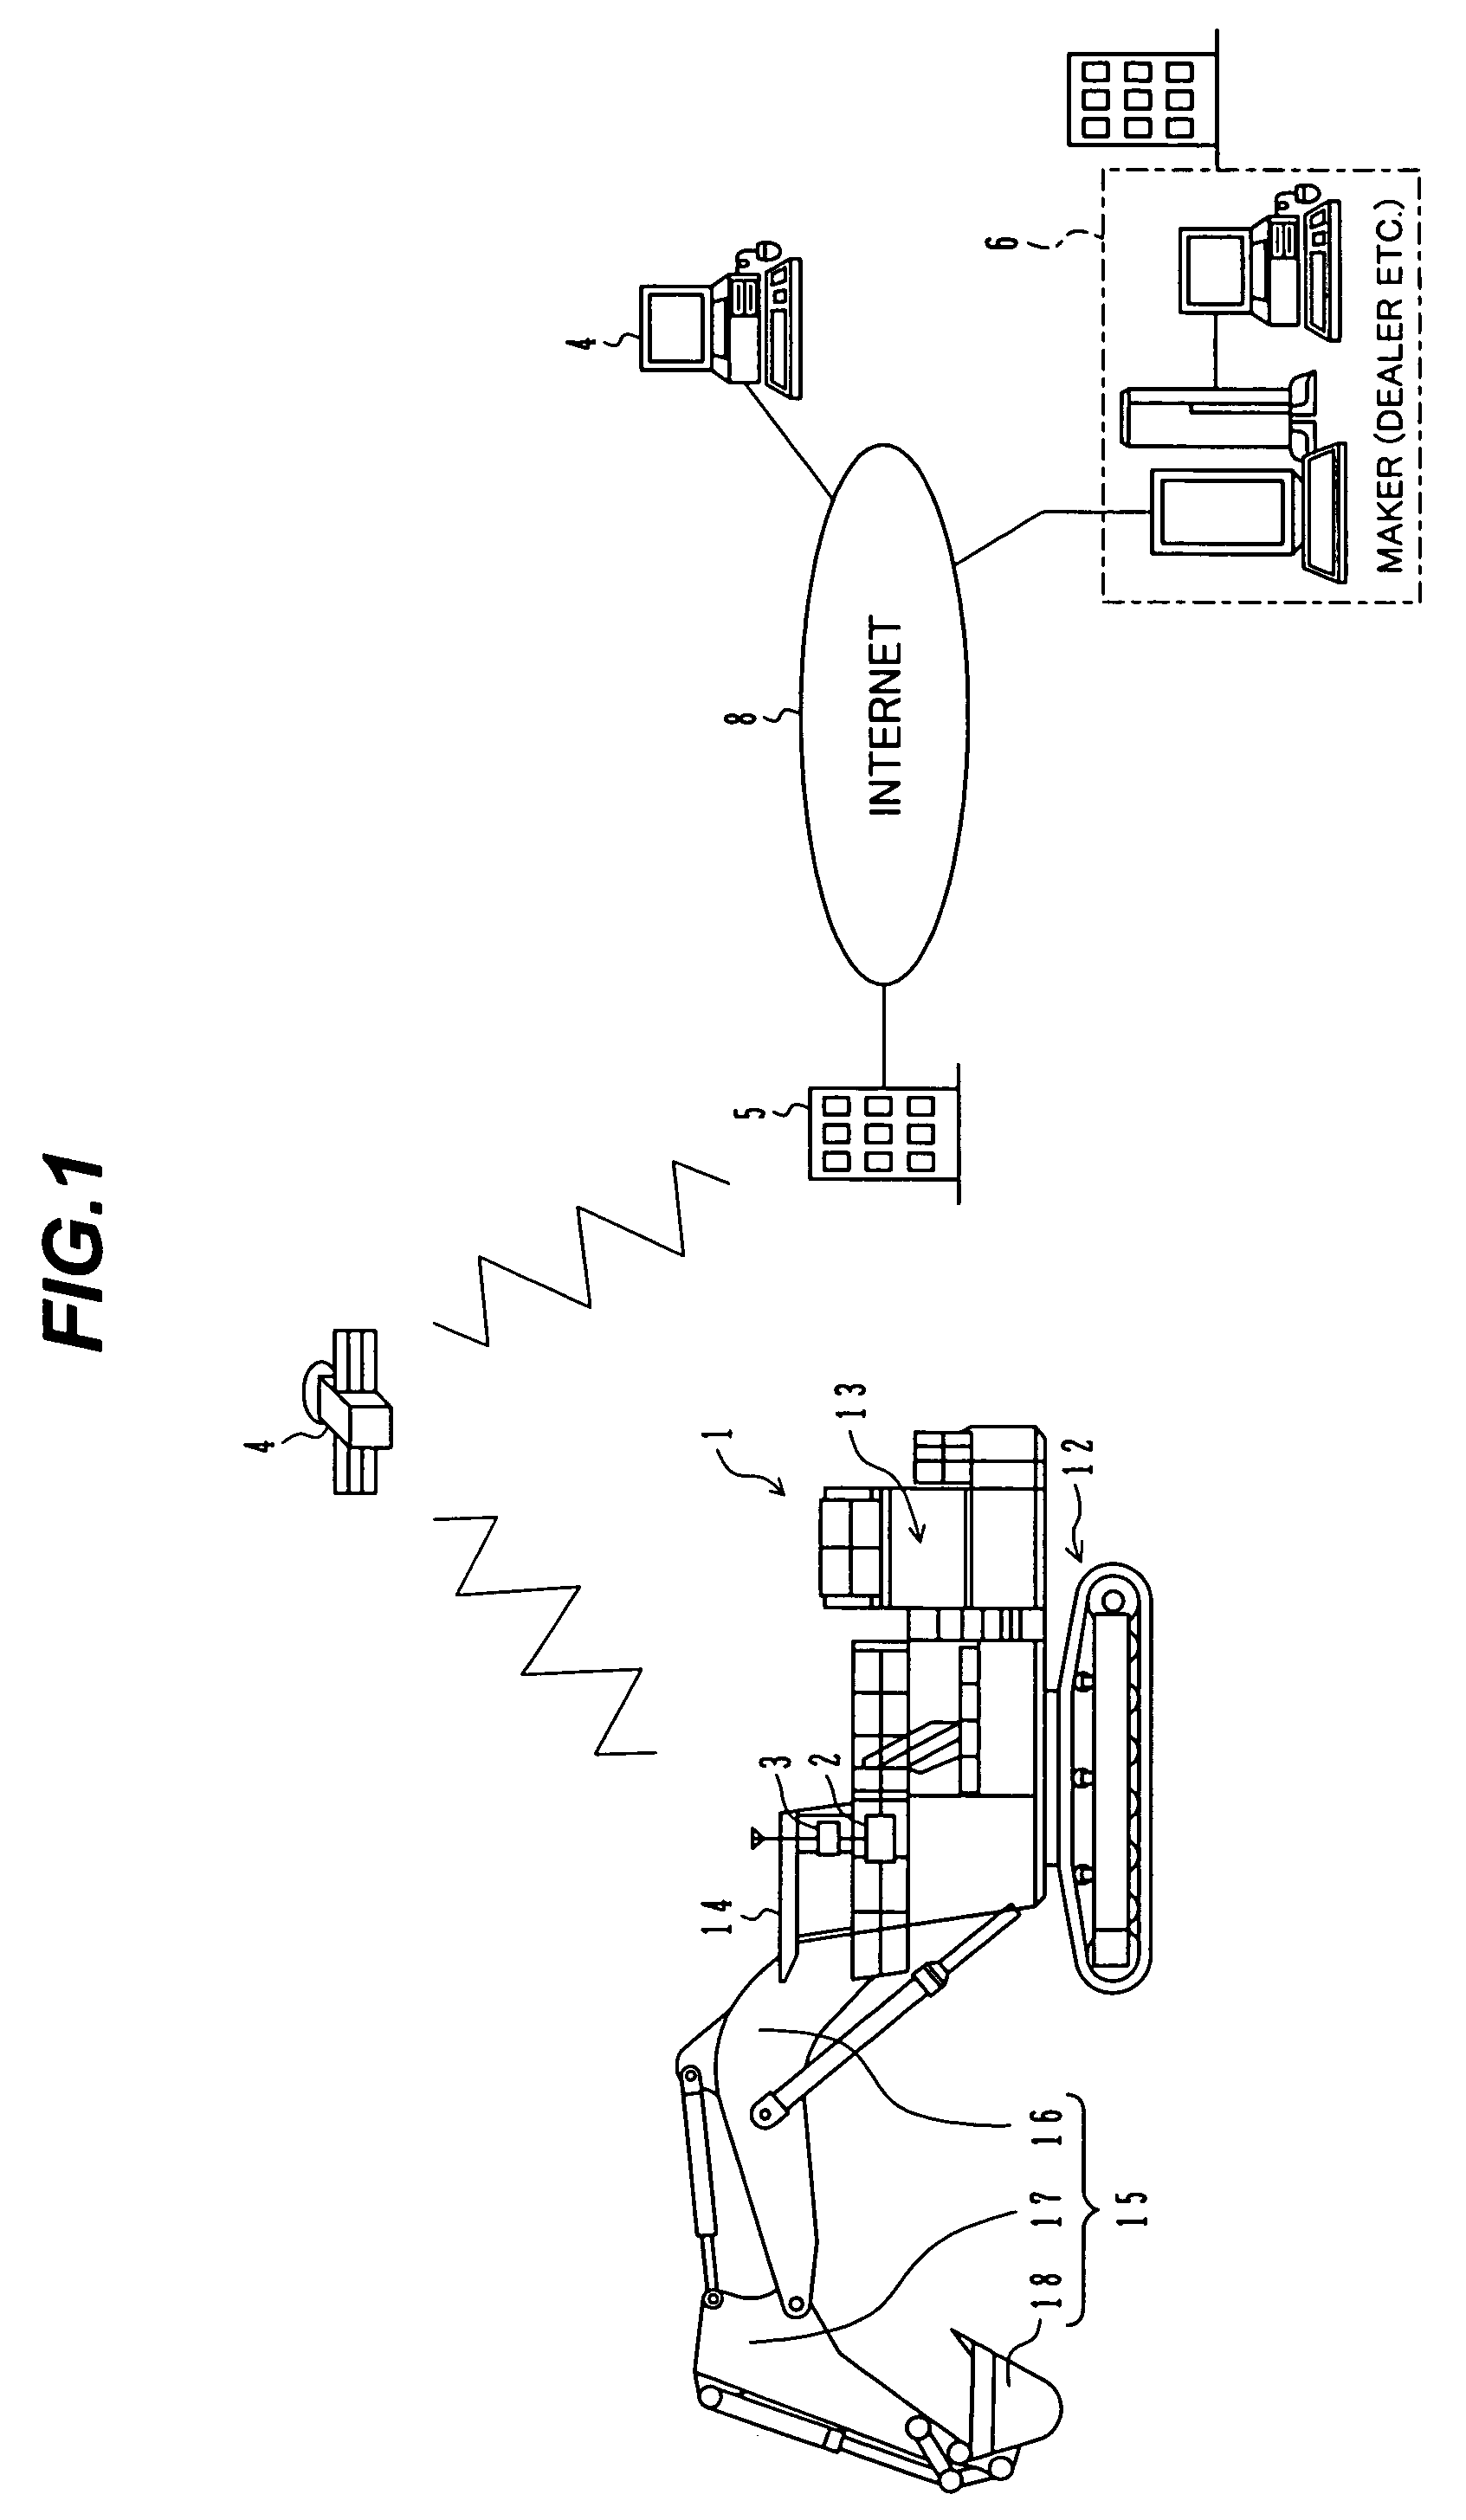 Operation information control device and system for a construction machine